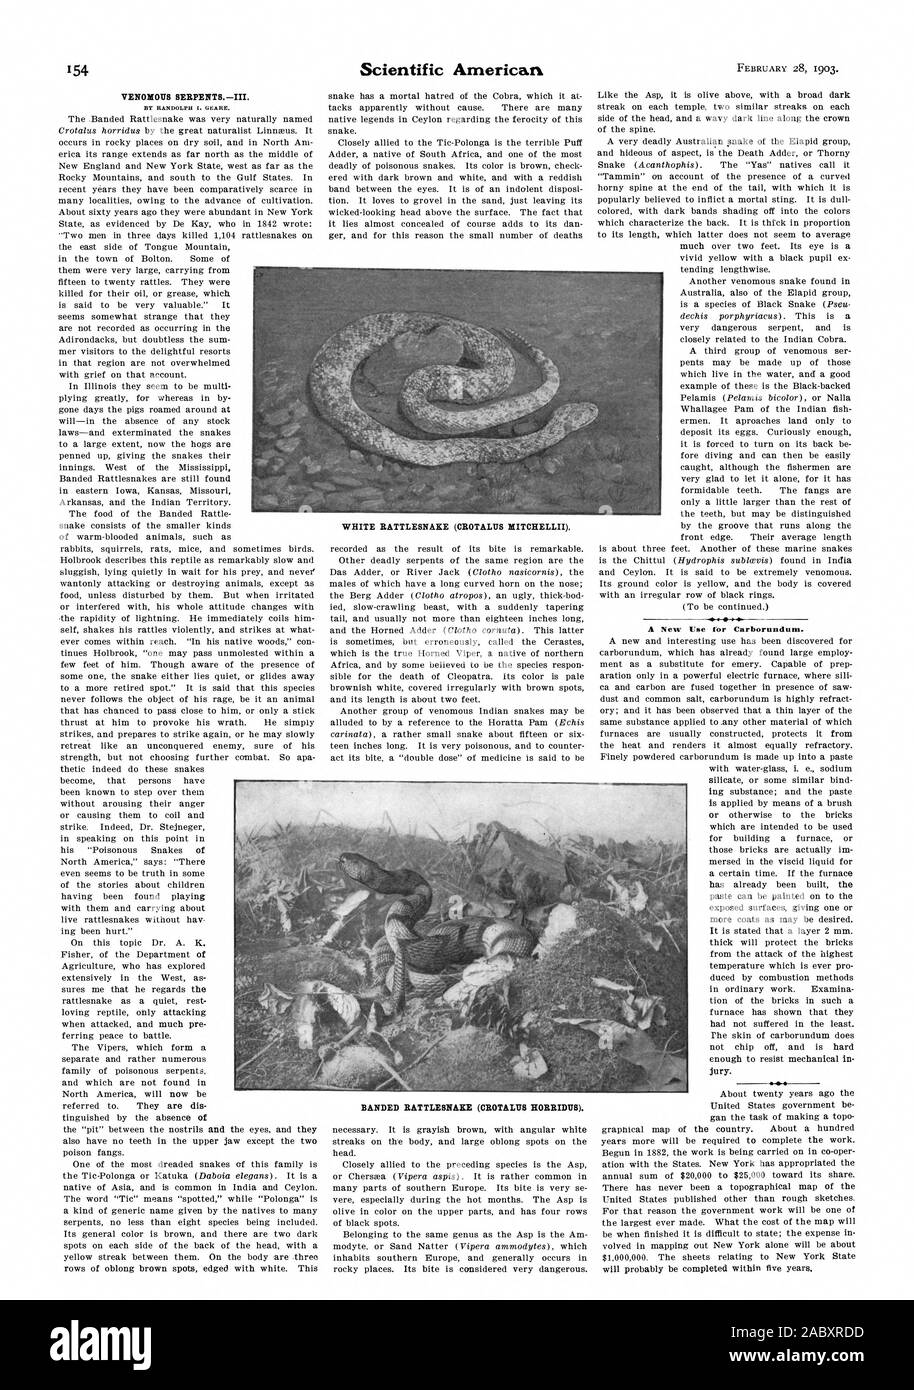 BY RANDOLPH 1. (MARE. A New Use for Carborundum. WHITE RATTLESNAKE (CROTALUS MITCHELLII). BANDED RATTLESNAKE (CROTALUS HORRIDUS)., scientific american, 1903-02-28 Stock Photo